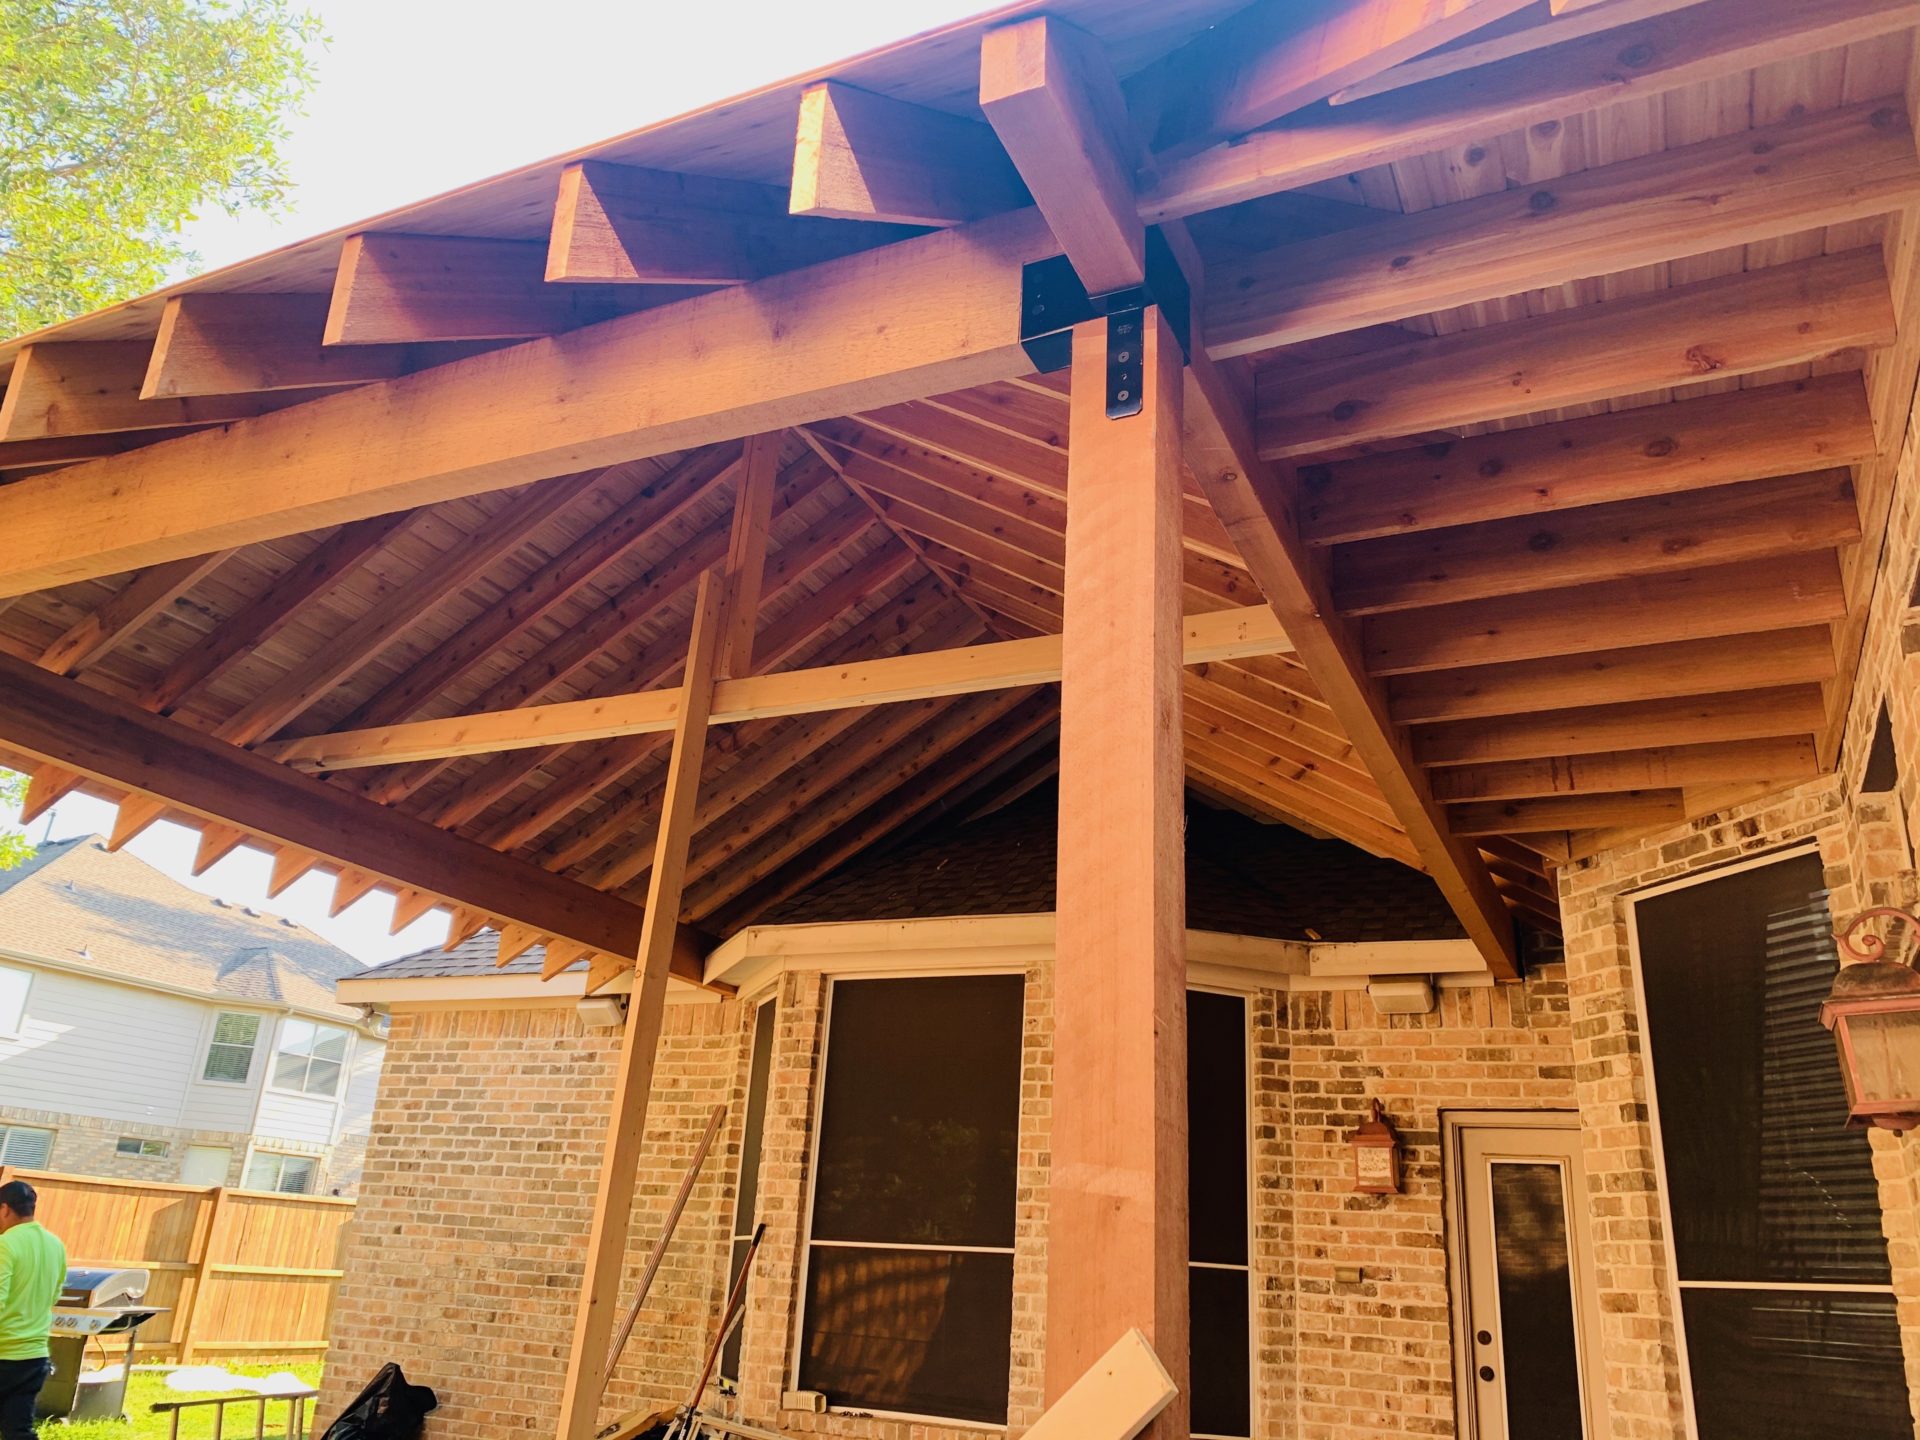 Underside of pavilion patio roof with fresh wooden crossbeams that extends home.